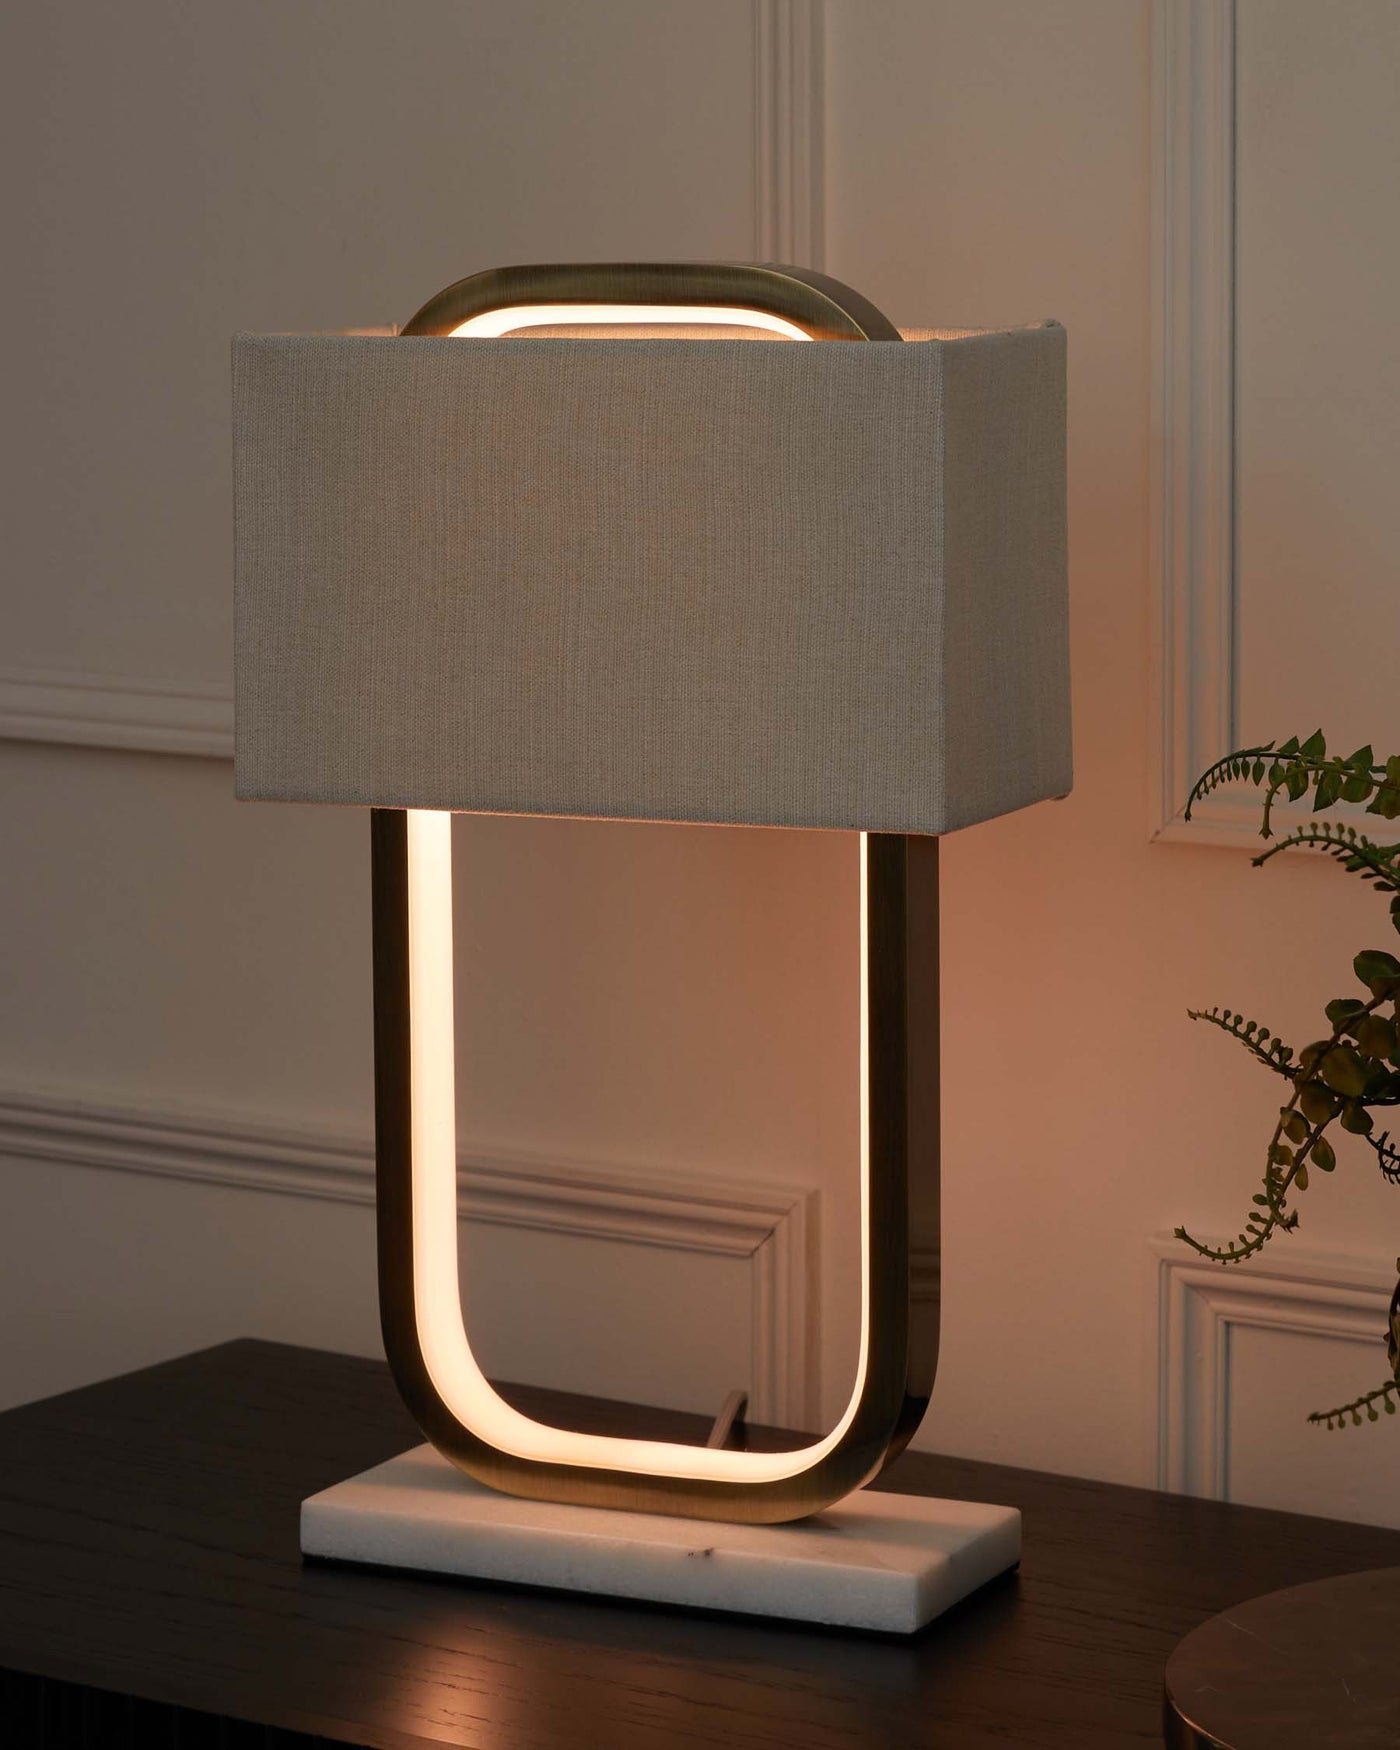 Modern table lamp with a unique geometric base featuring an illuminated open rectangular frame and a textured fabric shade.